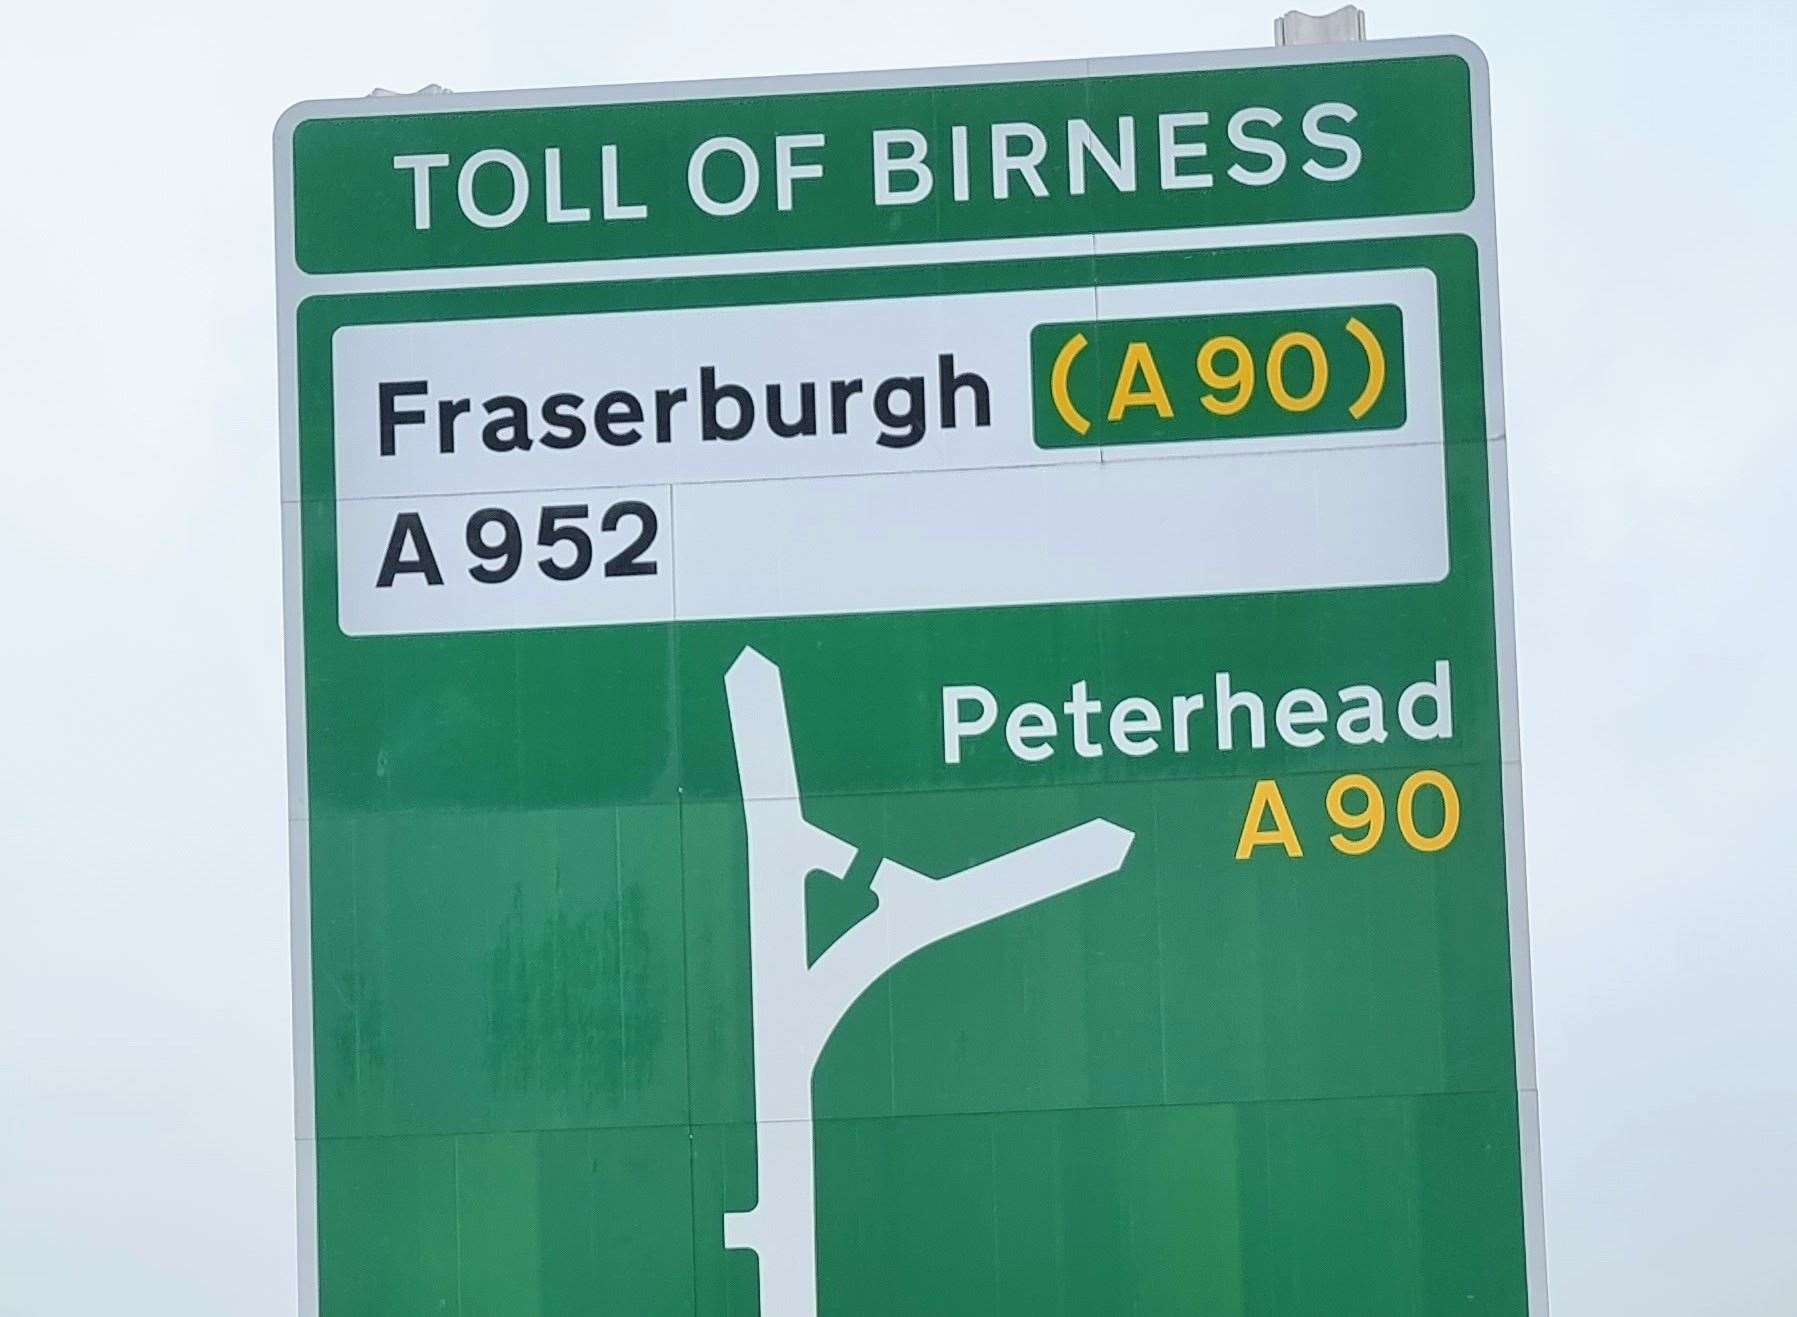 A call has been made to consider HGV use on the A90 road.